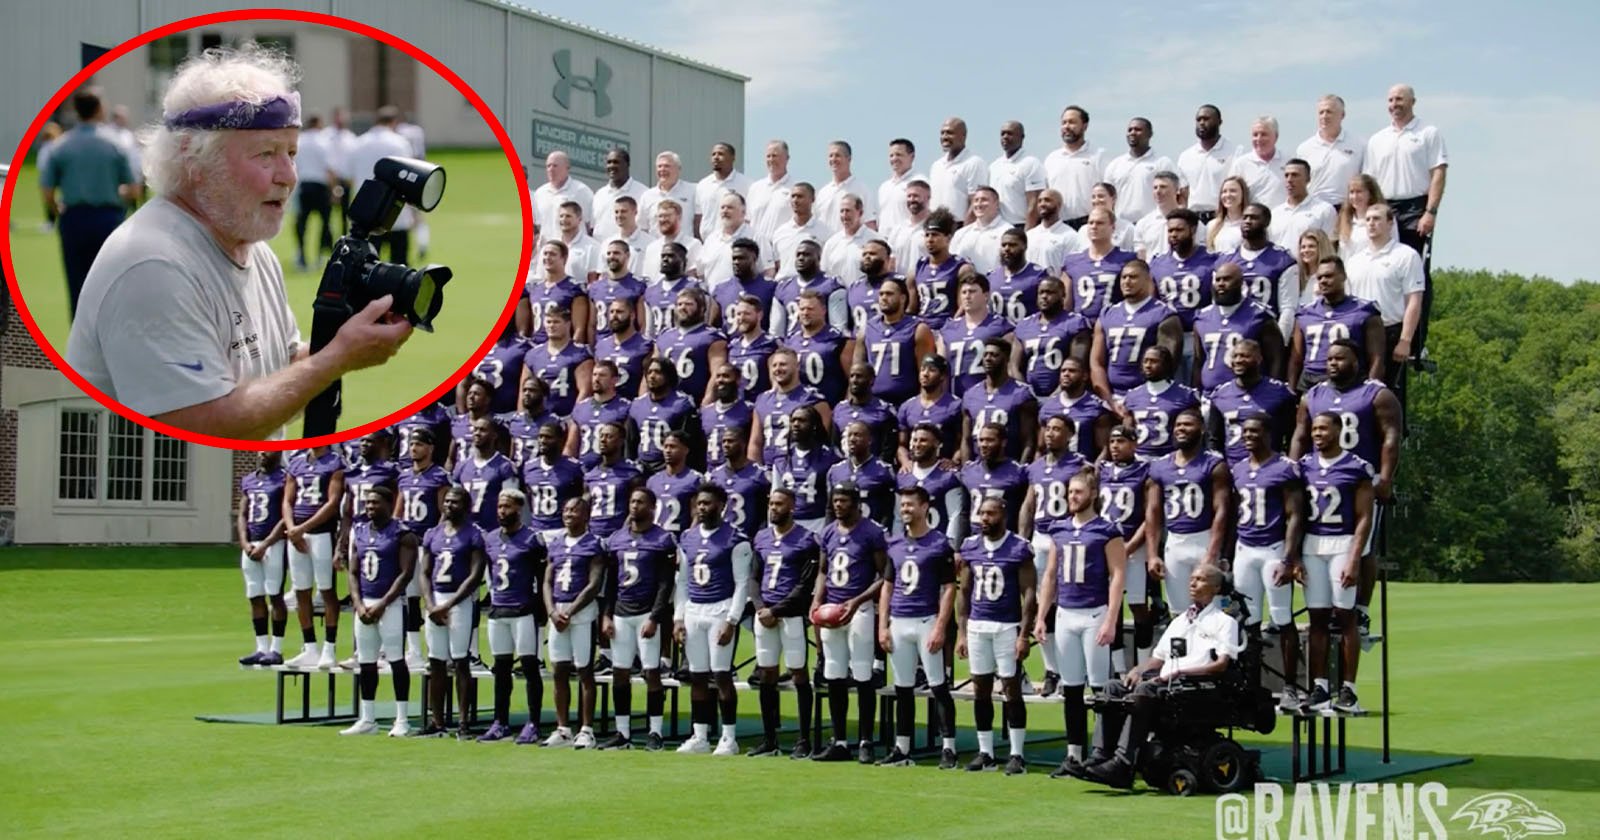 Baltimore Ravens Mic Up Their Photographer During Chaotic Team Photo Day